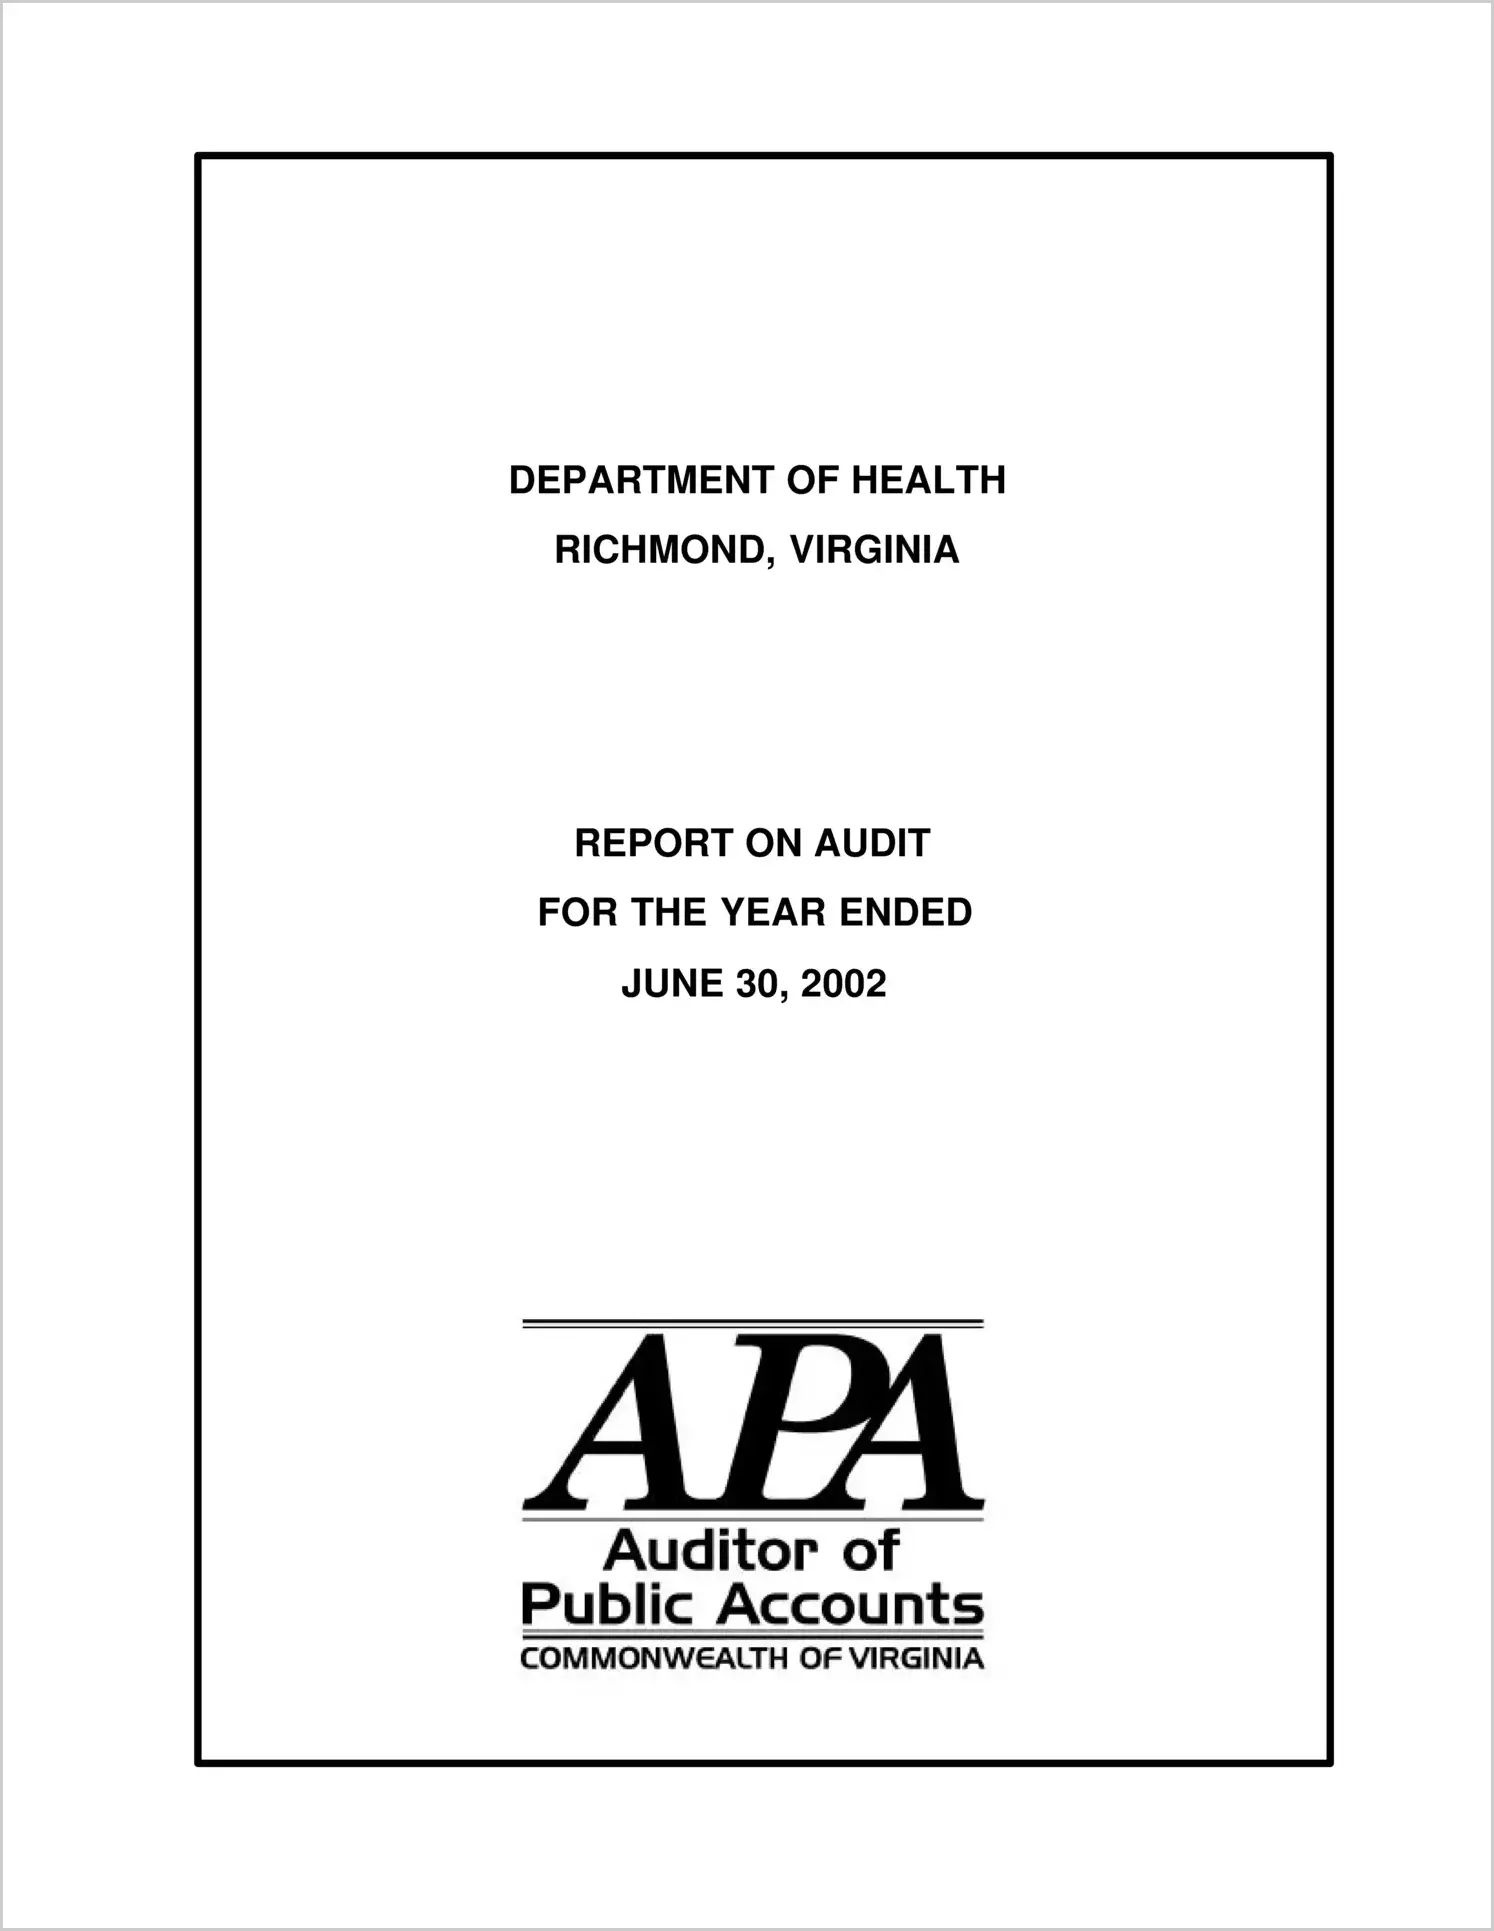 Department of Health for the year ended June 30, 2002